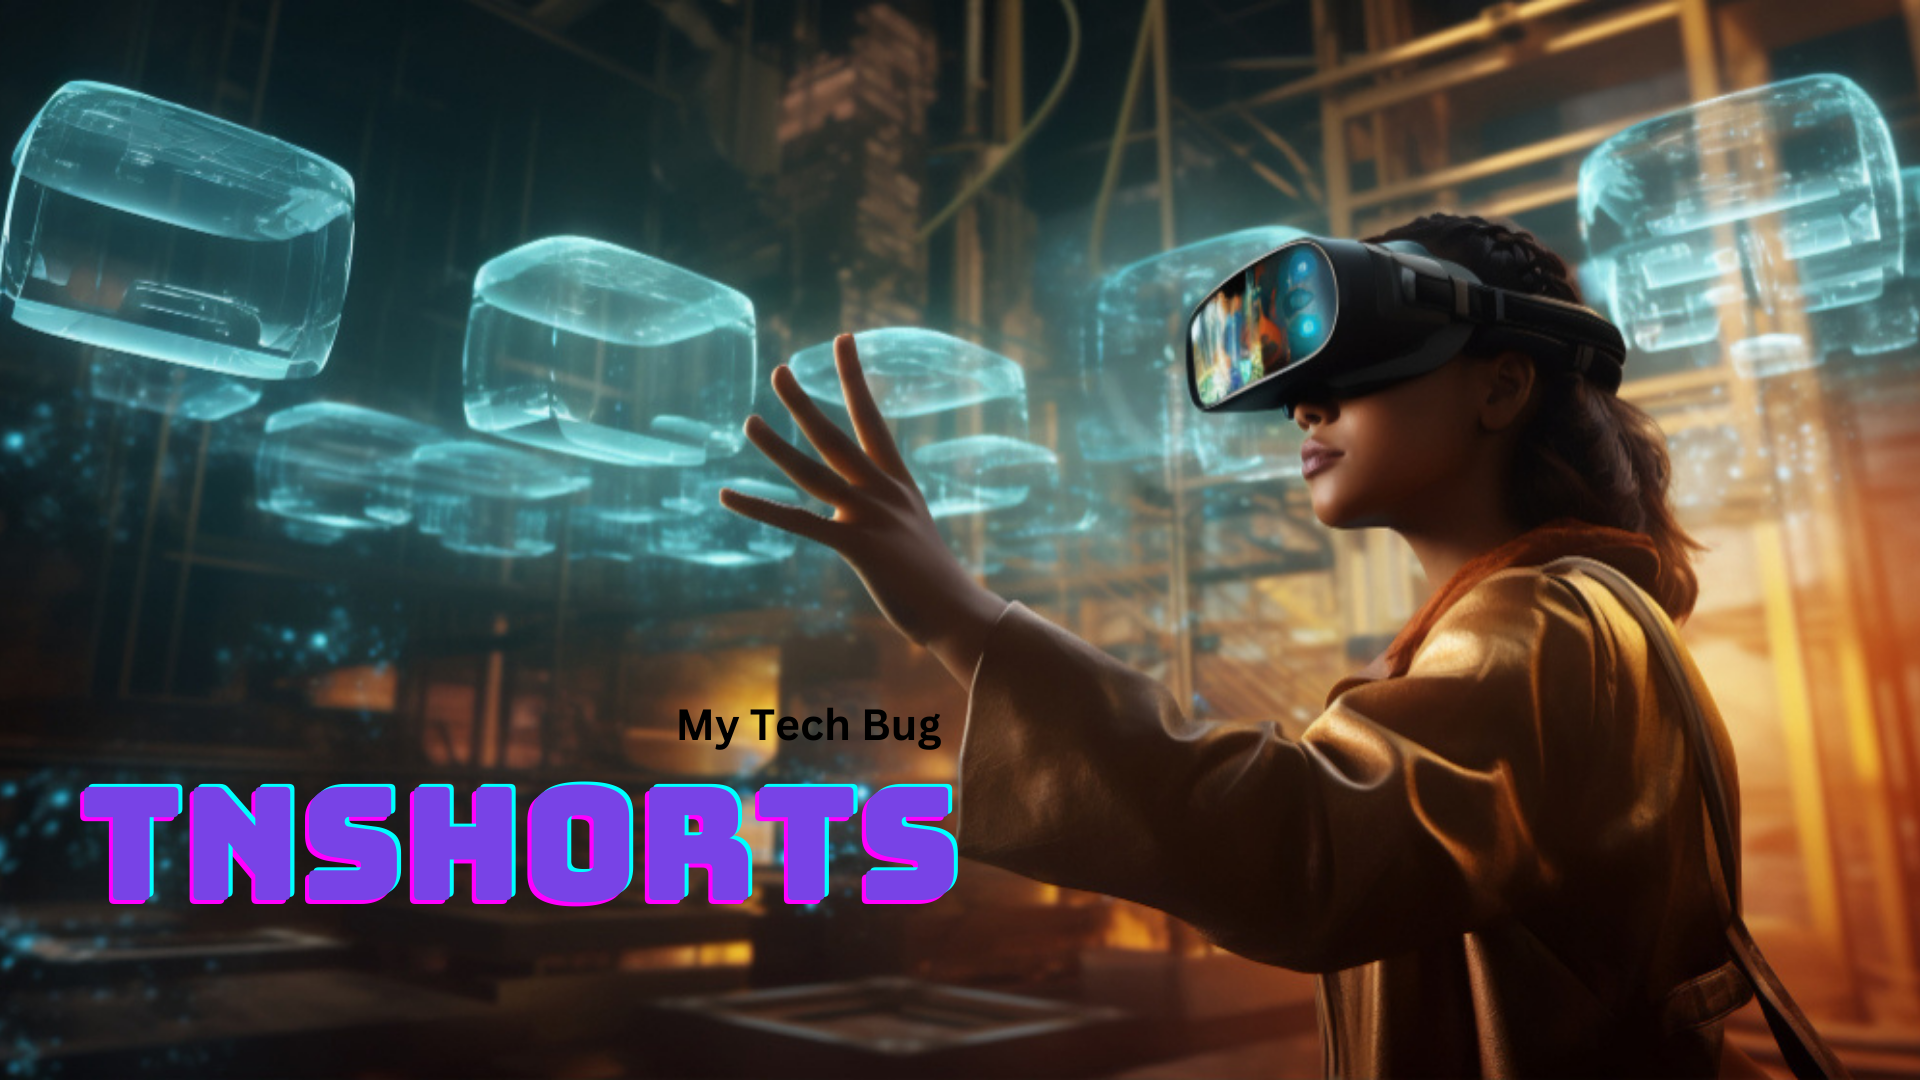 Tnshorts Unplugged Diving Into The Depths Of Technology, Gadgets, and More;